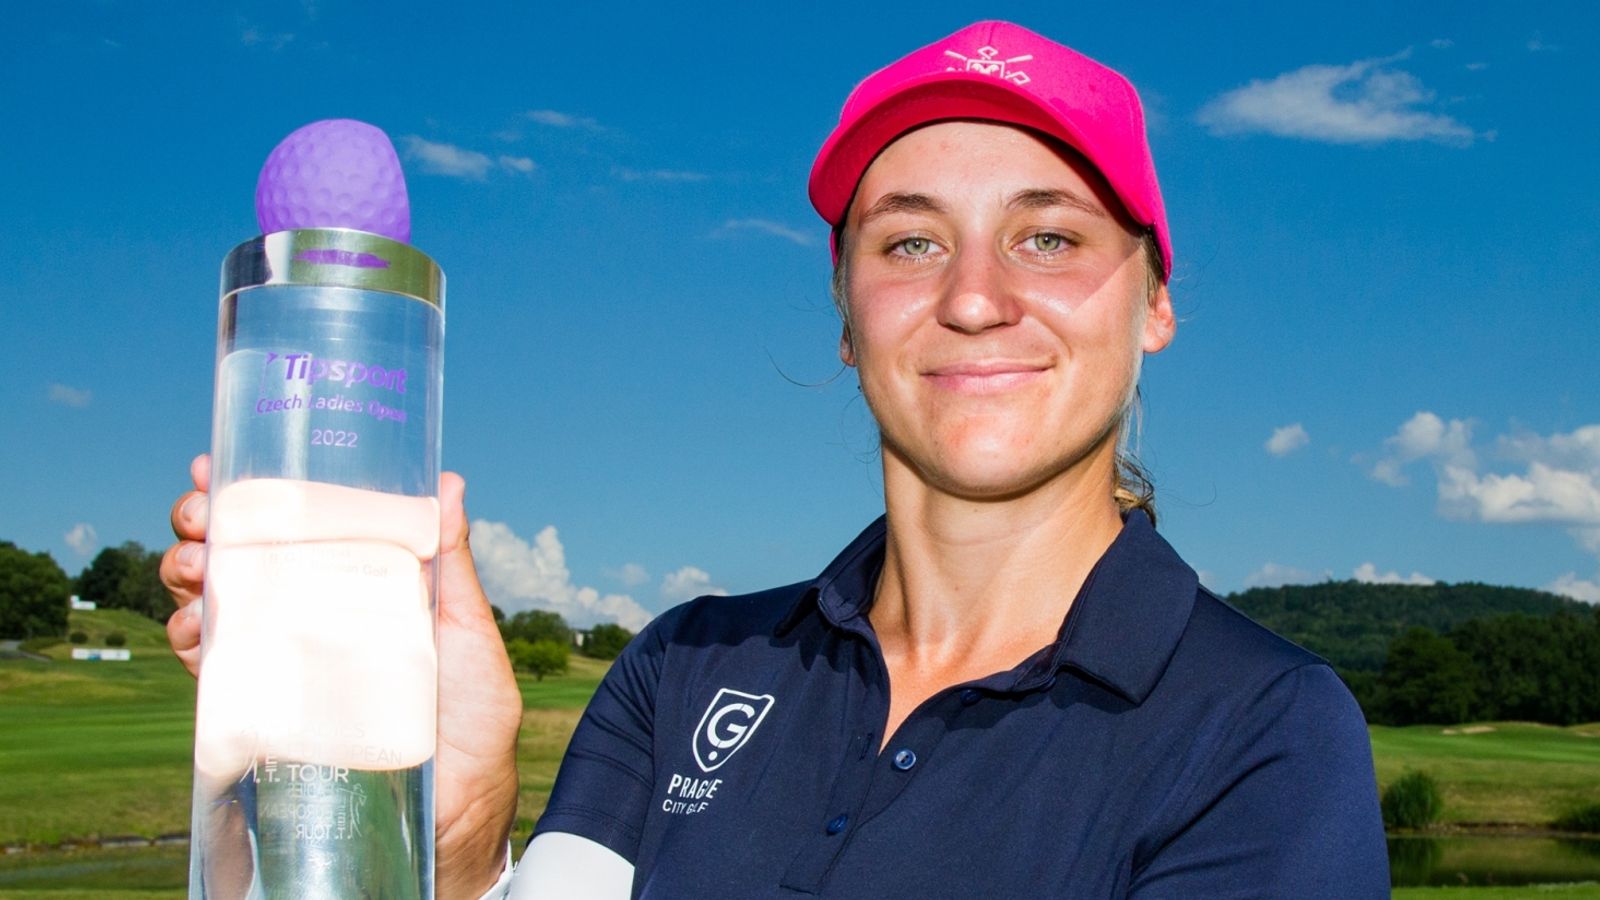 Golf round-up: Amateur Jana Melichova wins on Ladies European Tour; two qualify for The Open in Korea